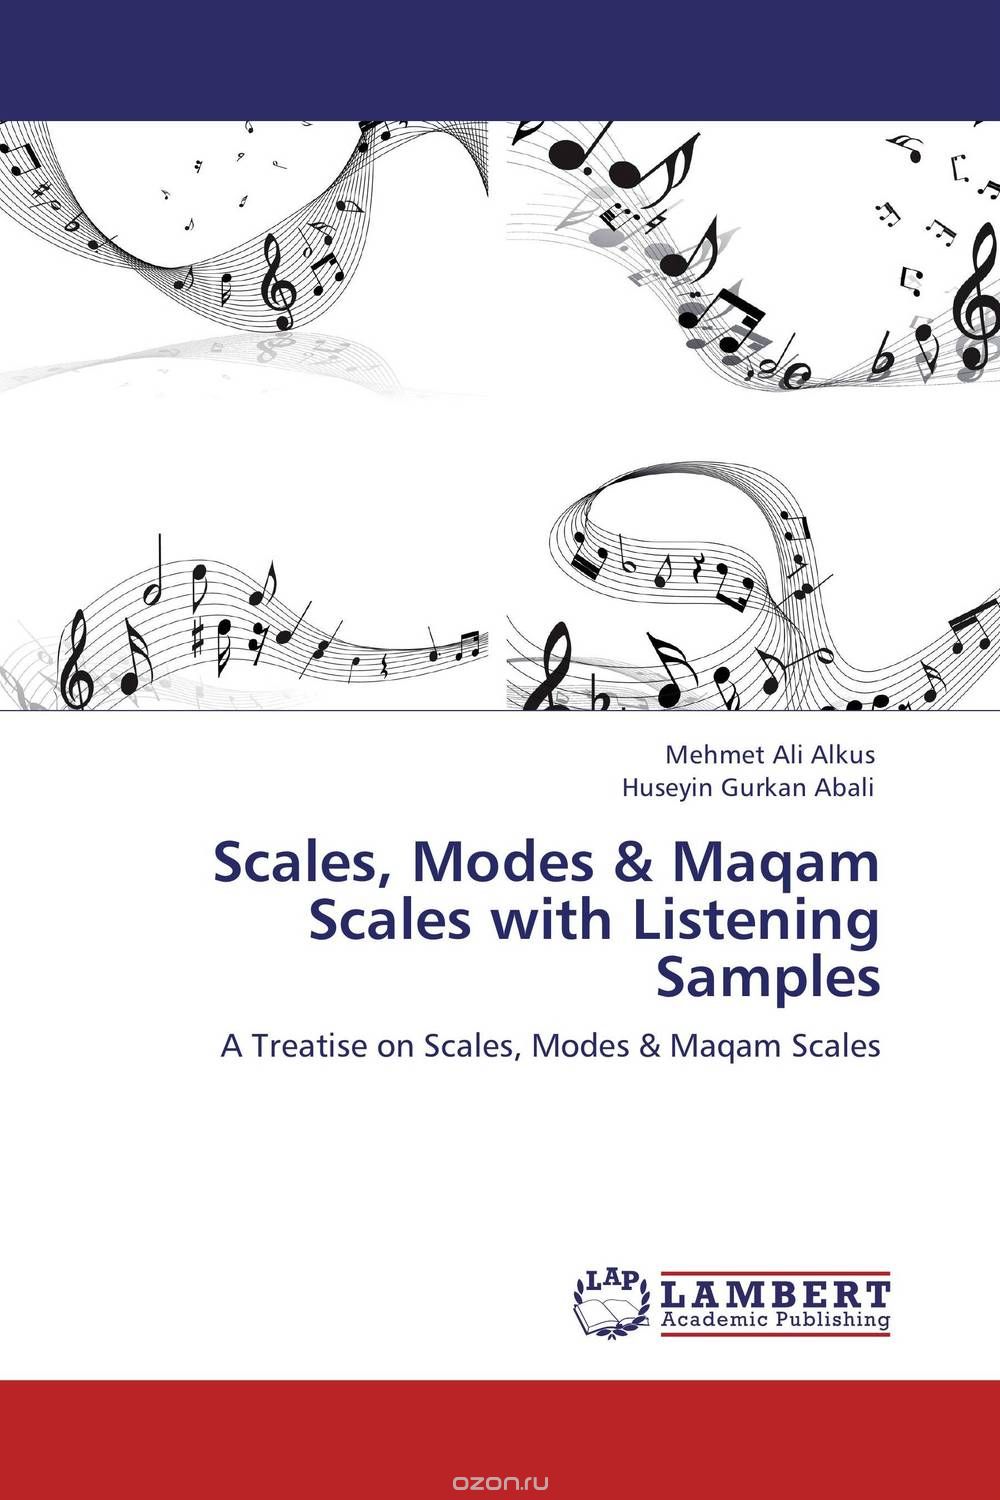 Scales, Modes & Maqam Scales with Listening Samples